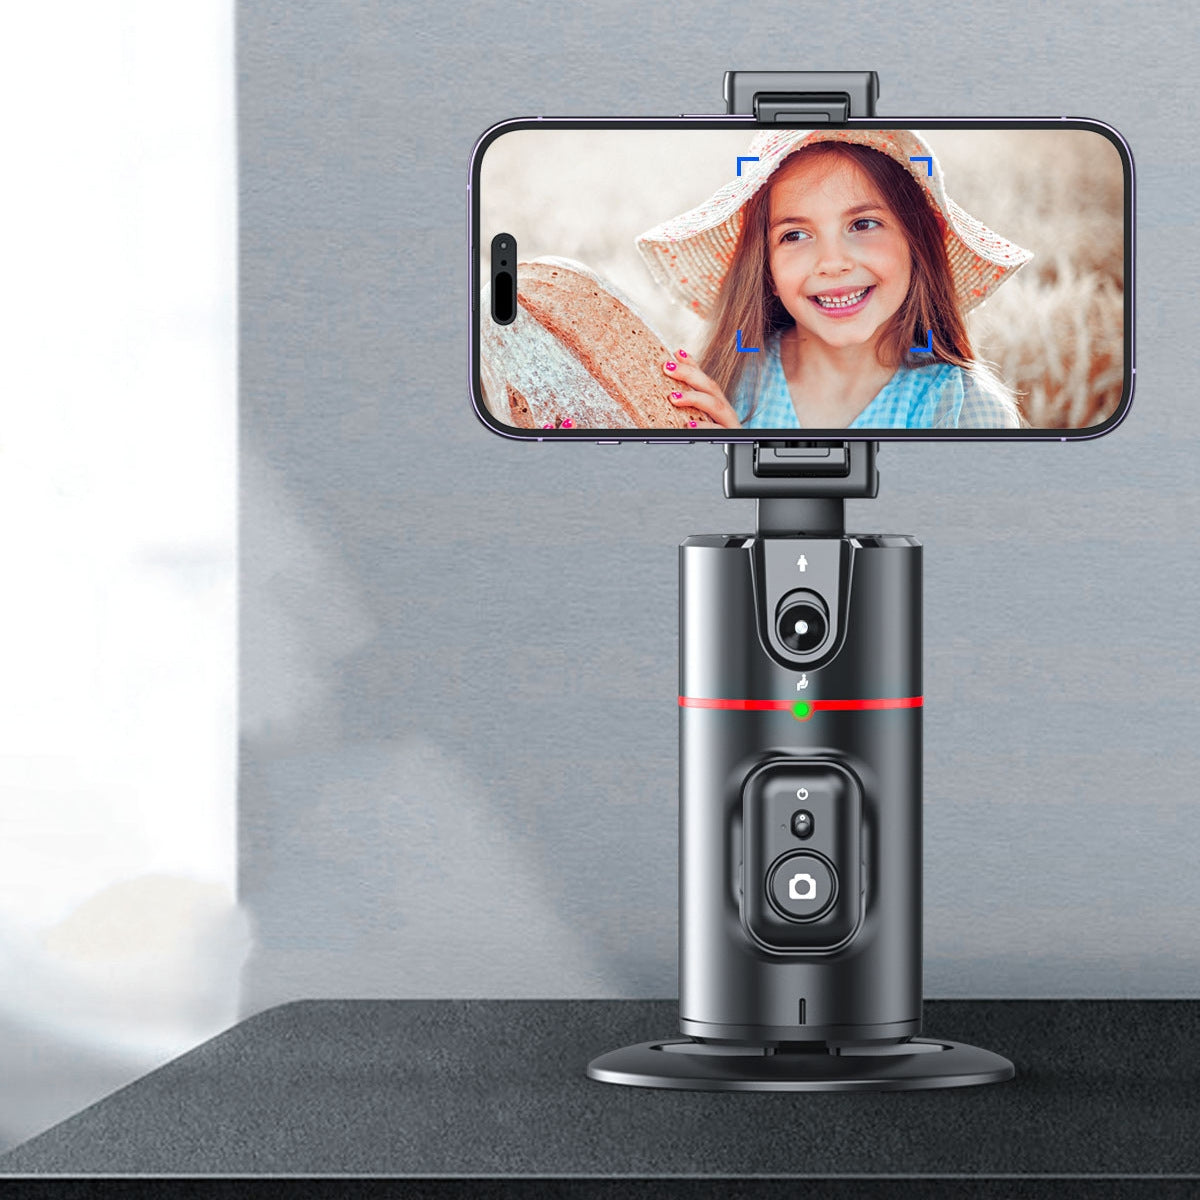 Capture flawless photos and videos with our AI-driven face tracking smartphone camera base. Effortlessly attaches to your device for precise subject framing and focus. Elevate your photography and video calls with ease. Upgrade your smartphone camera capabilities with this smart AI accessory.